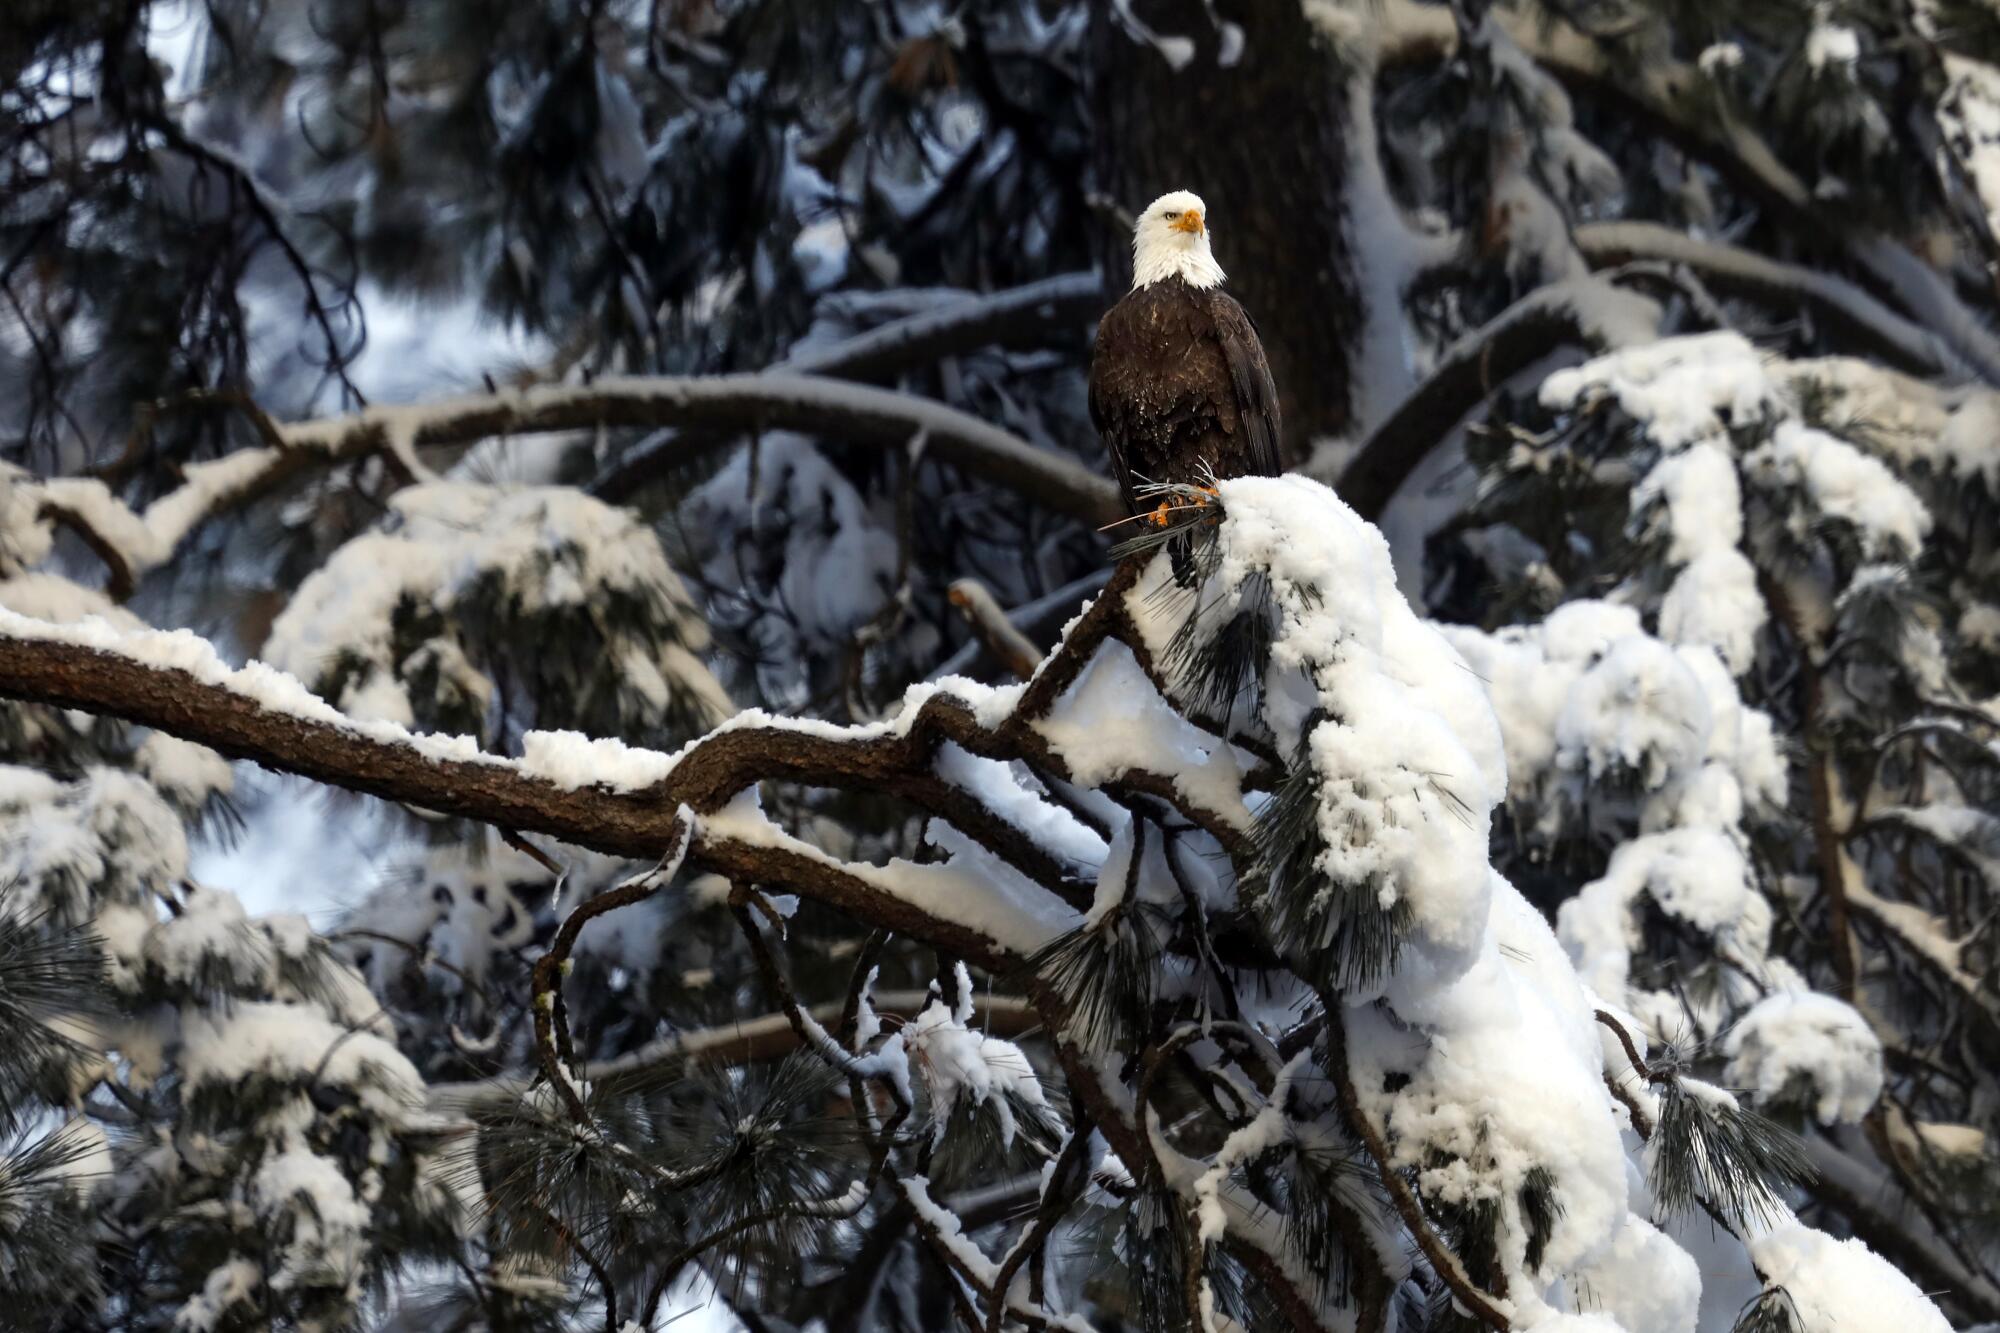 A bald eagle in a snow-covered tree.